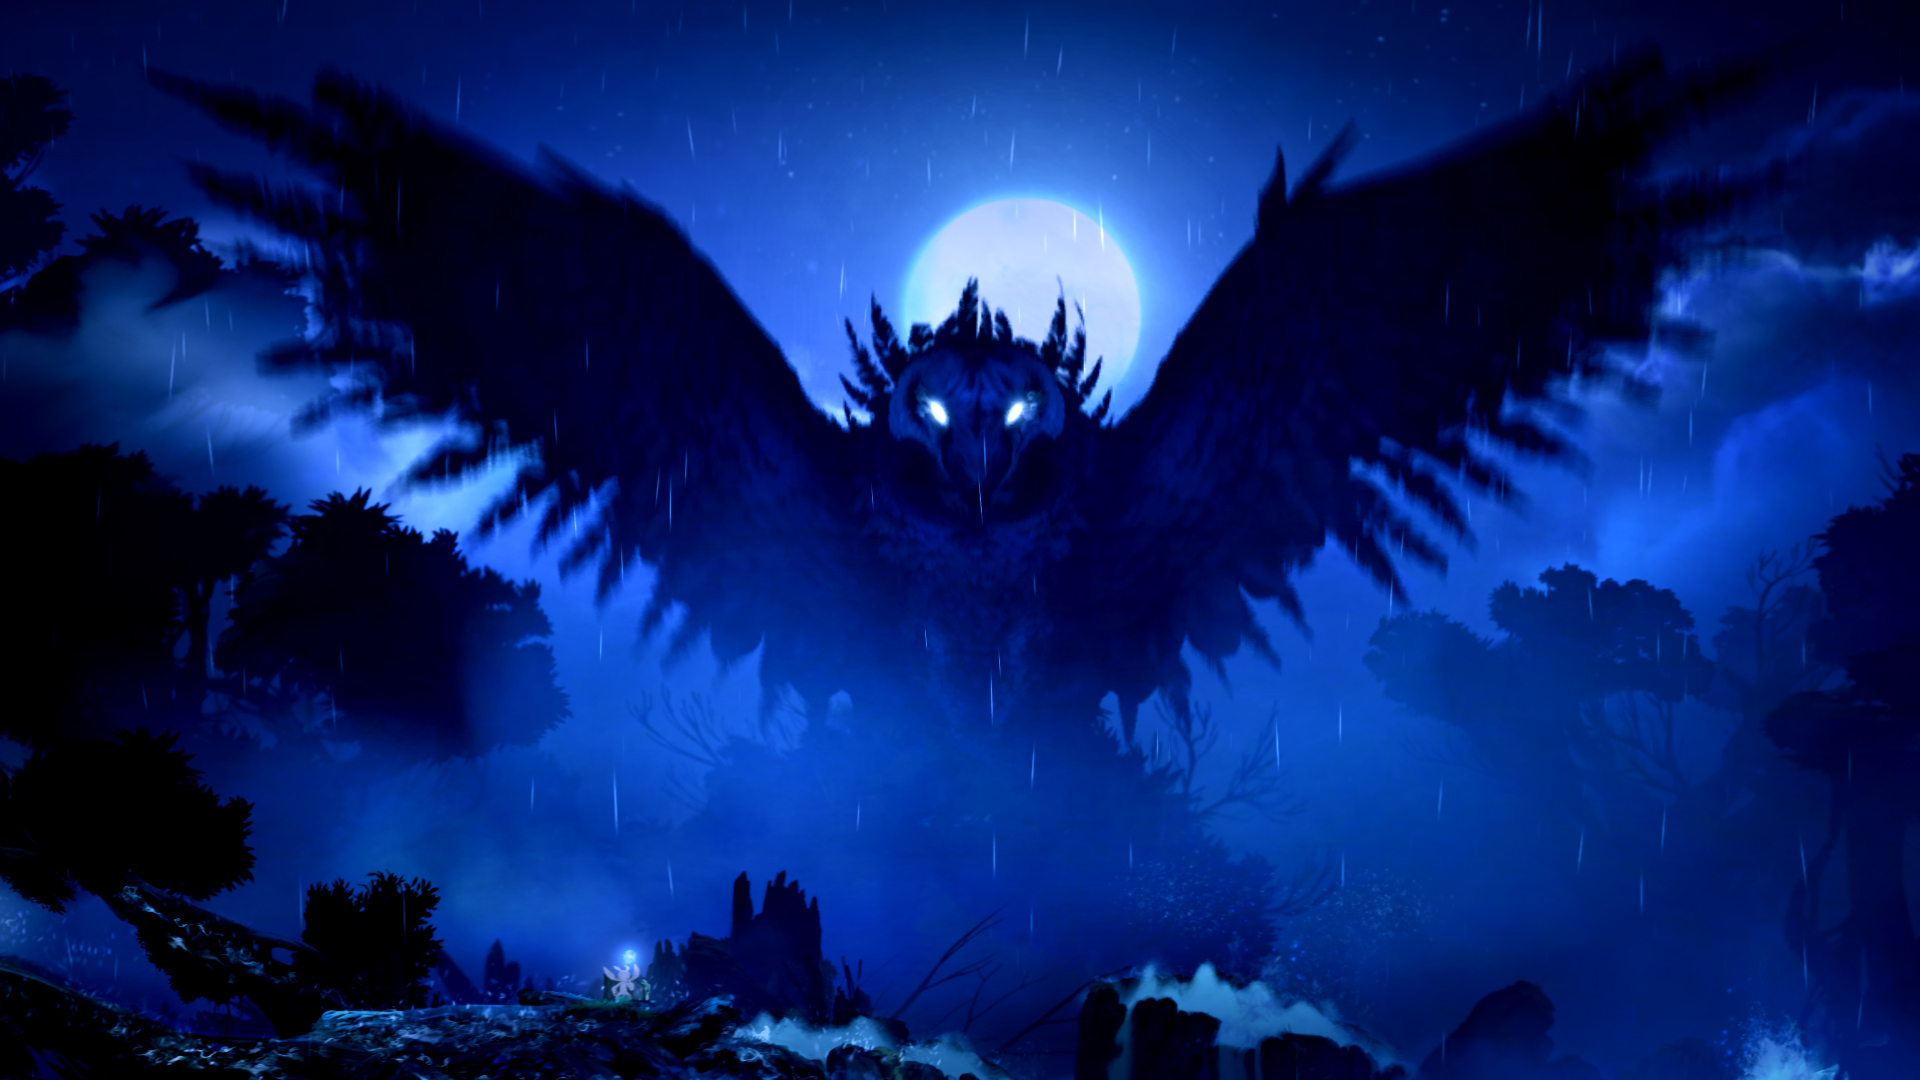 Ori and the Blind Forest screenshot